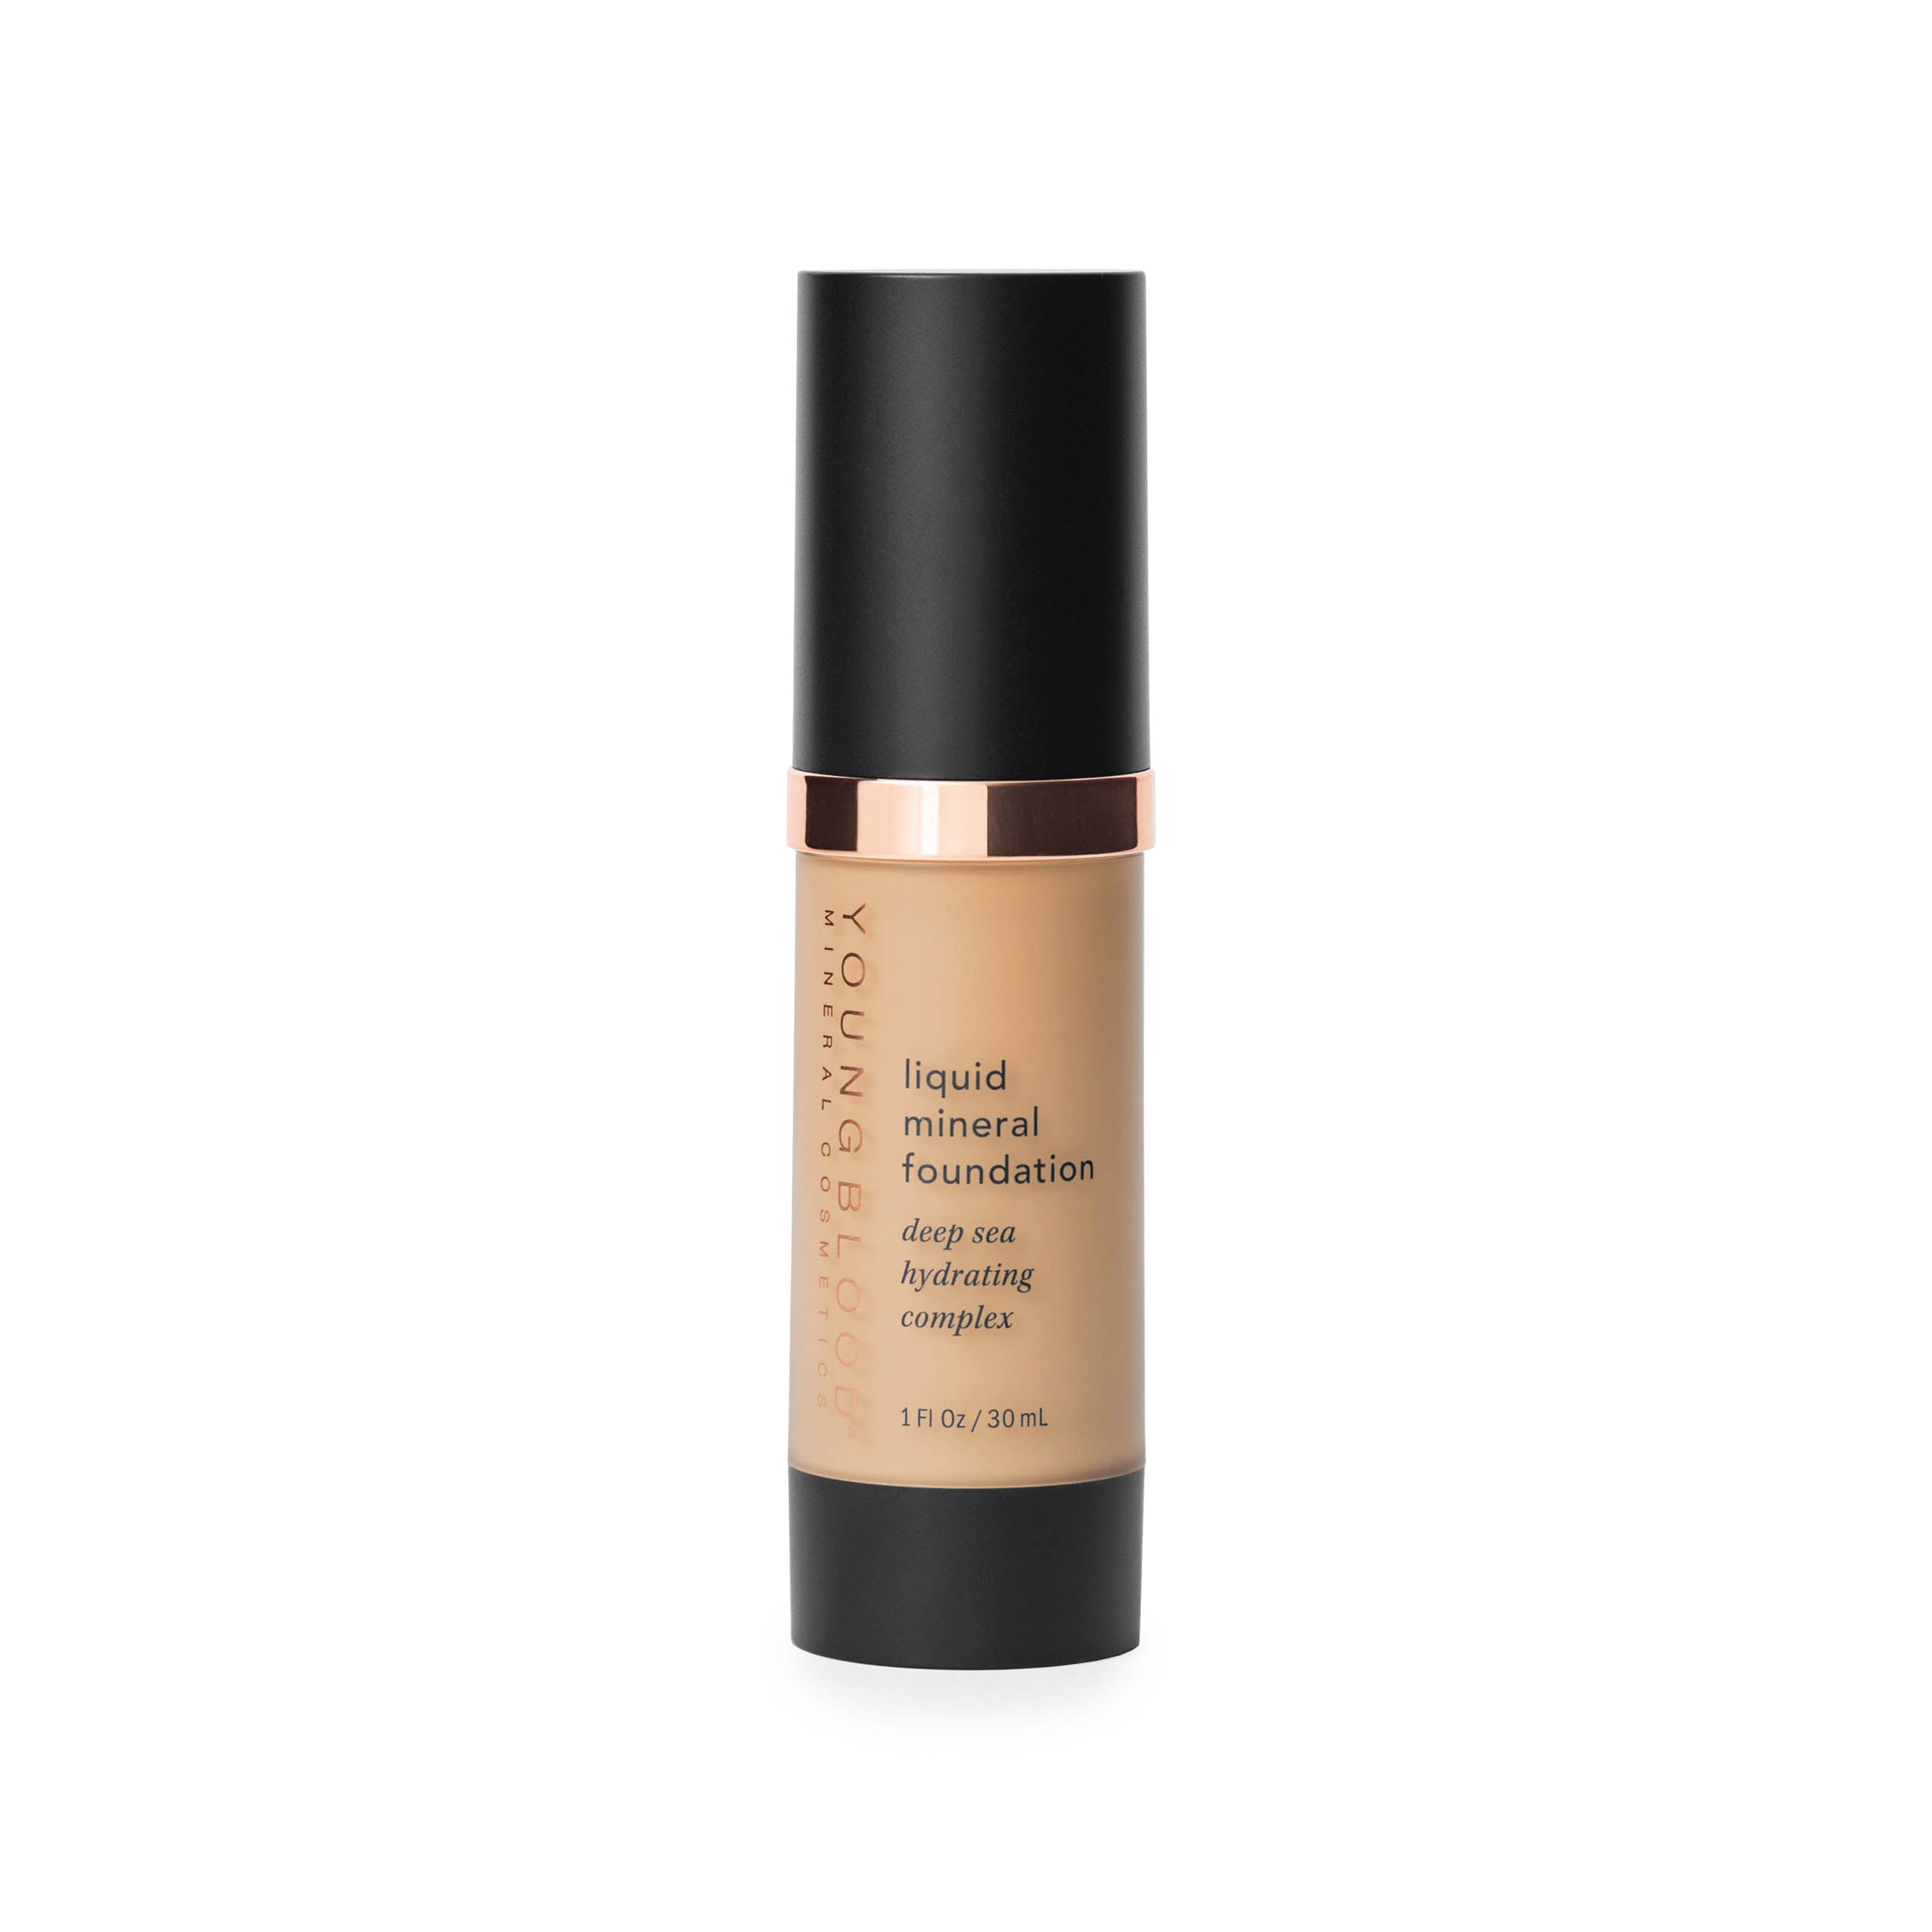 Youngblood Liquid Mineral Foundation 30ml - Nutmeg (previously Caribbean)